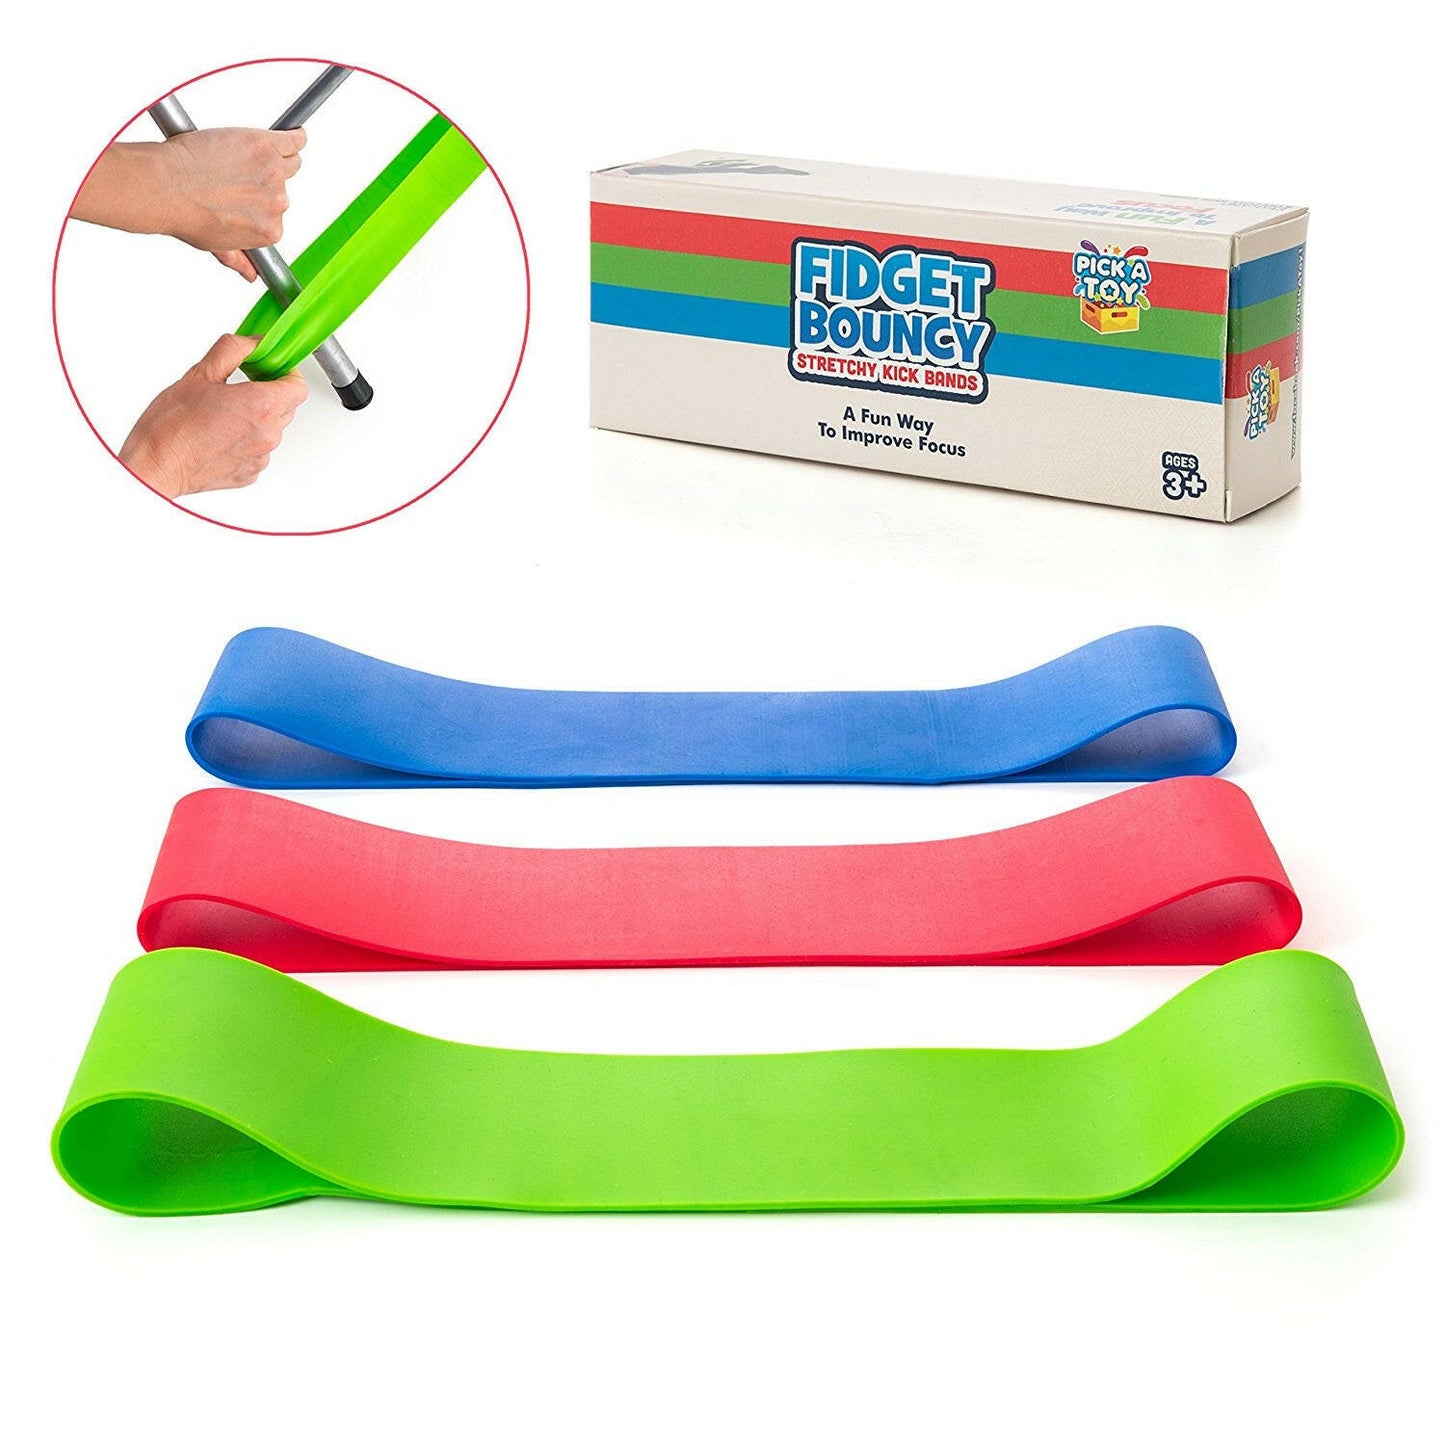 Stretchy Resistance Fidget Bands Toy For Kids 3 Pack - Pick A Toy